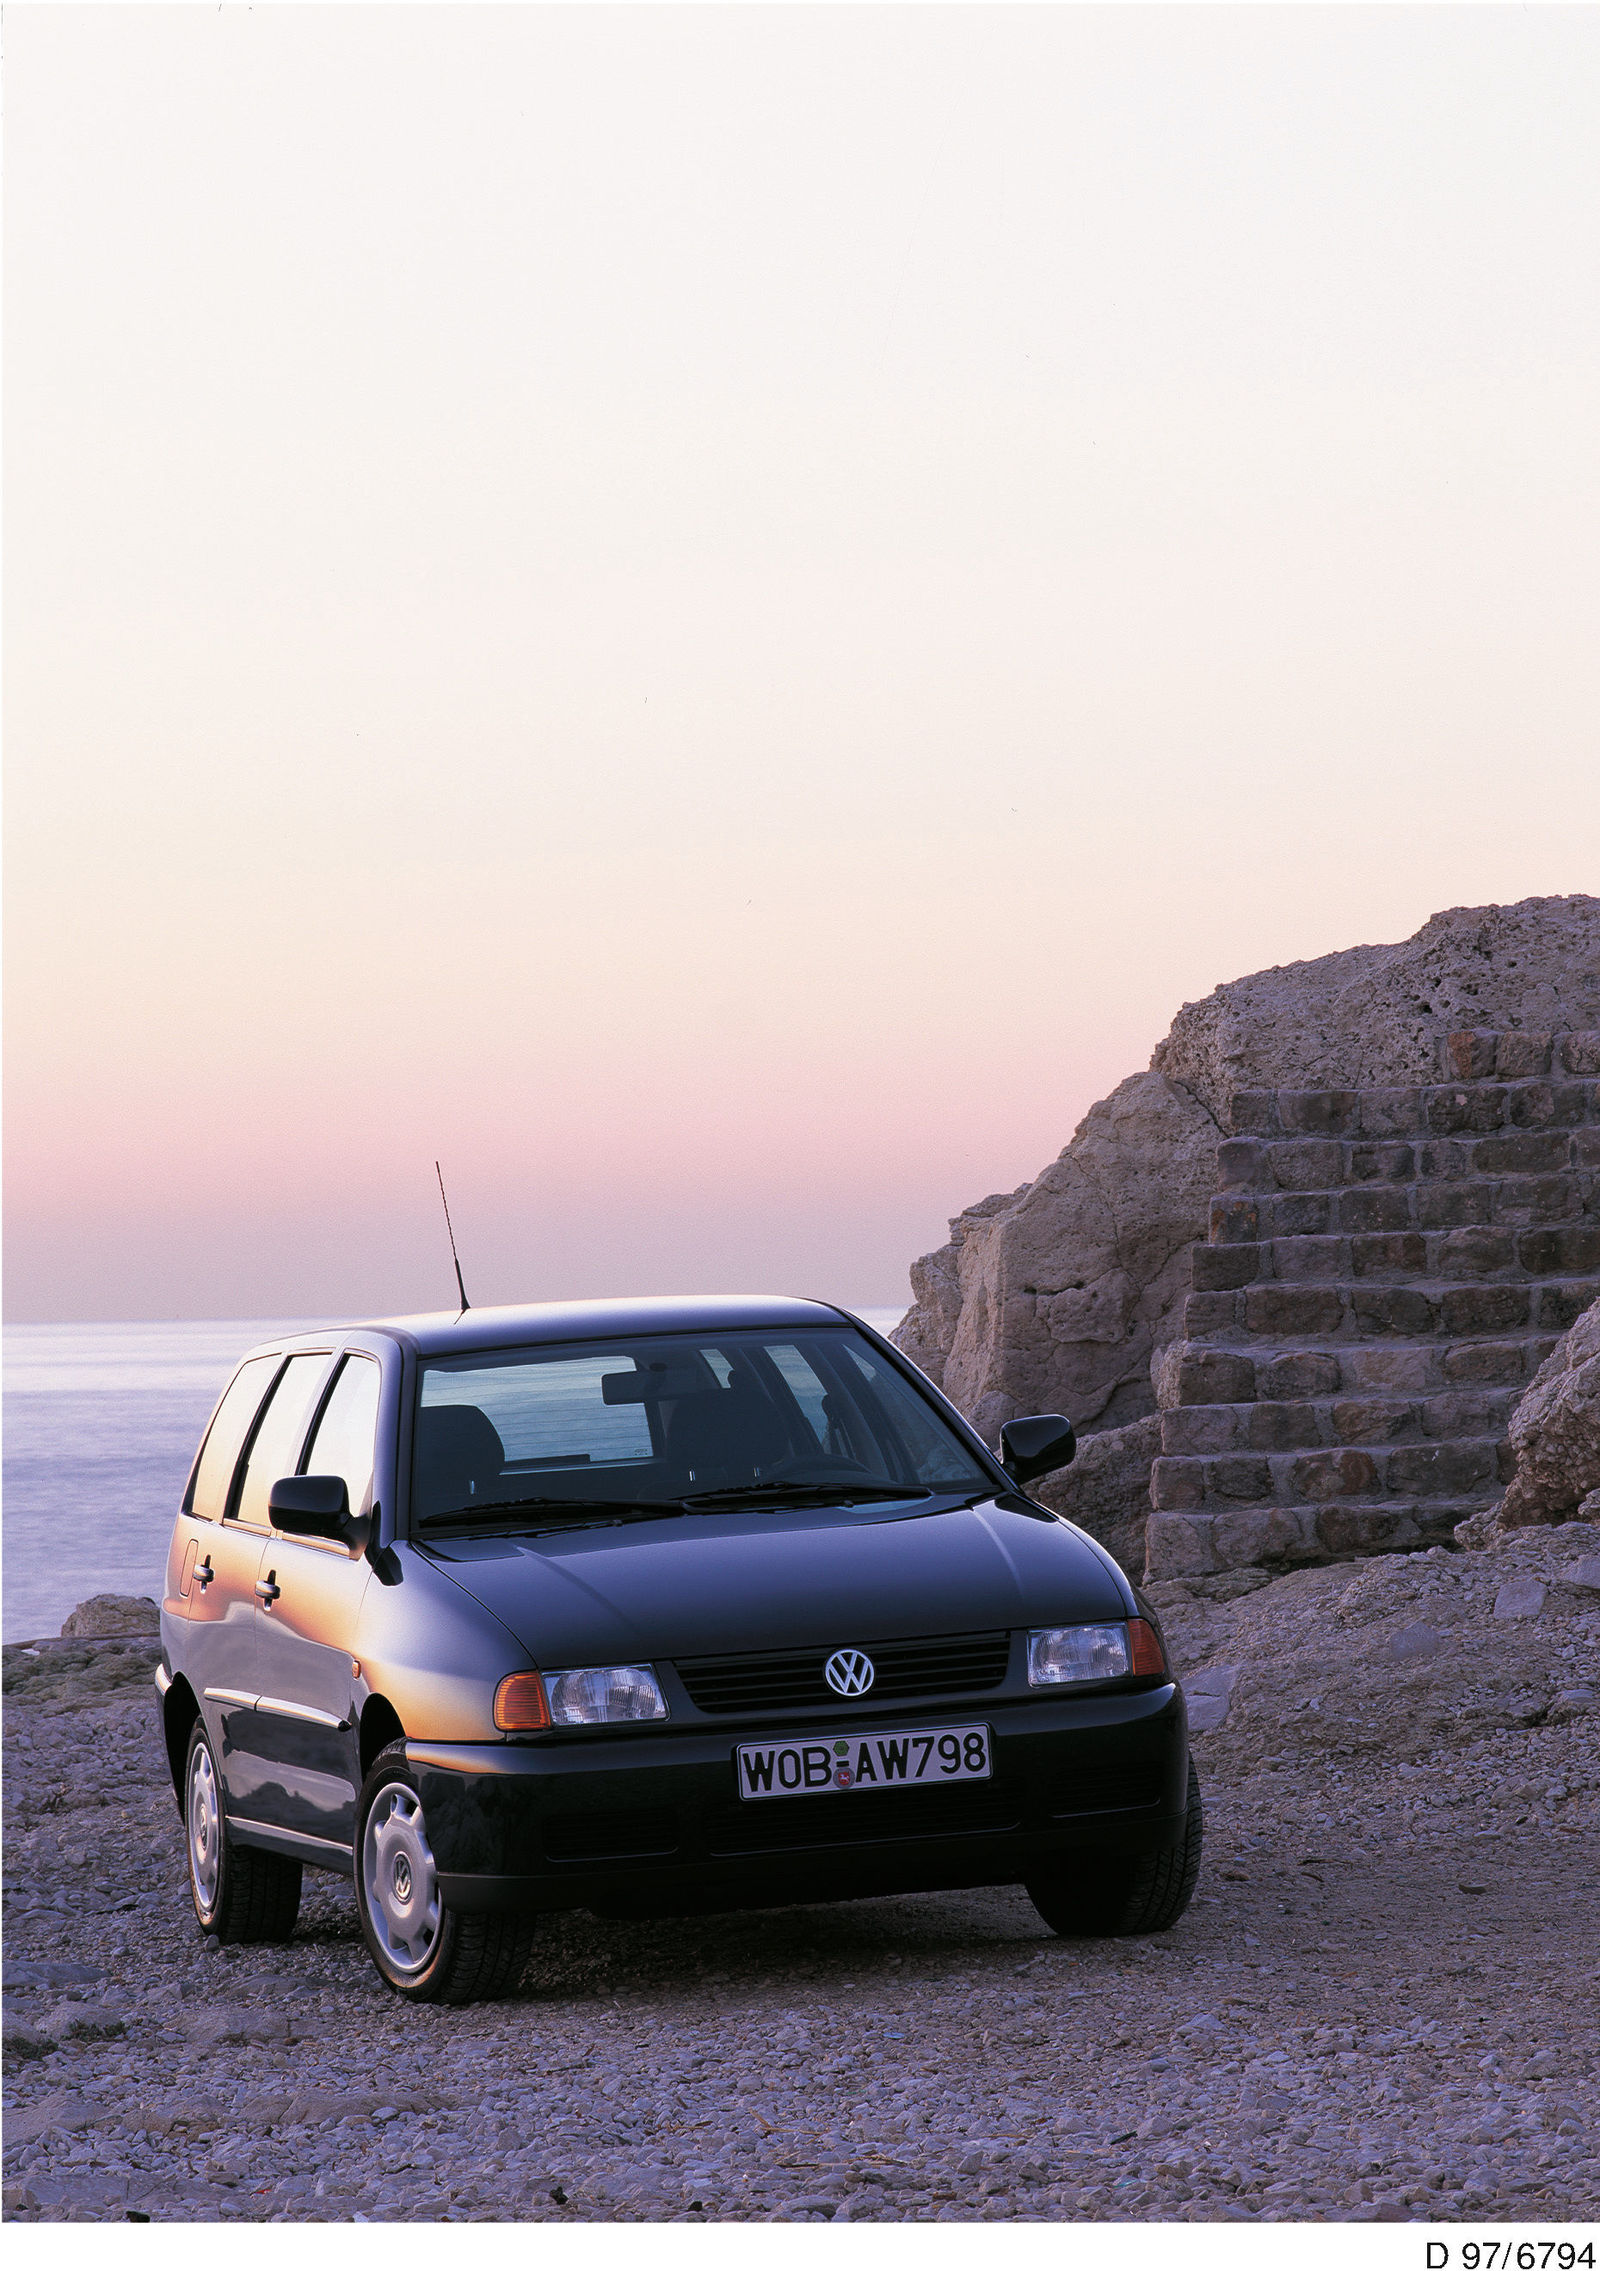 Product: Polo Variant (1997)